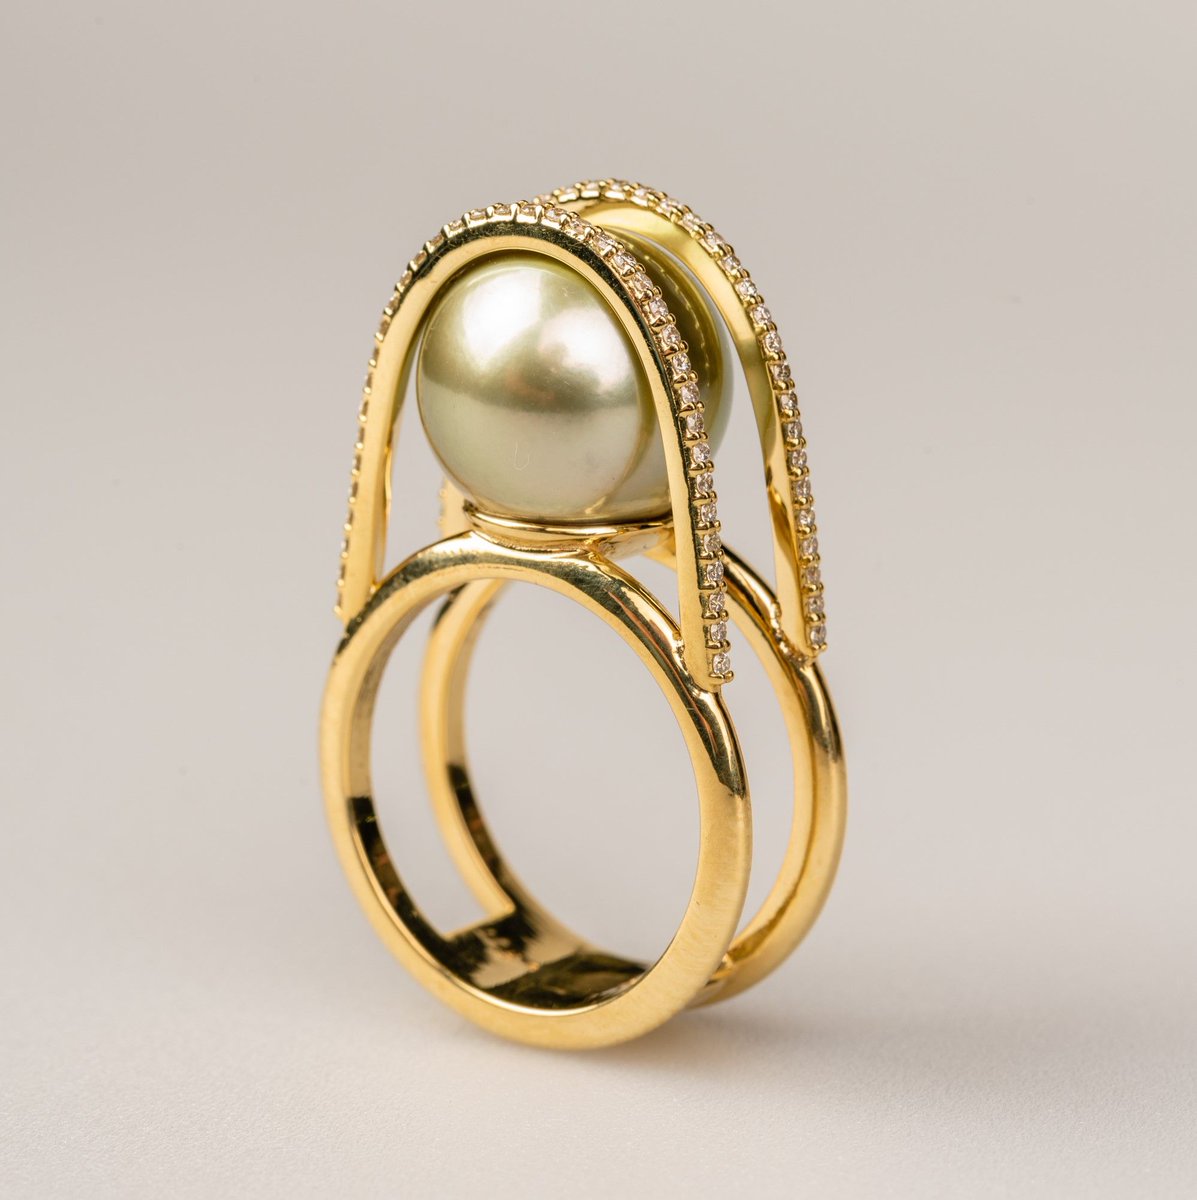 An architectural and airy #pearl #ring 
A 12.5mm #TahitianPearl and champagne #diamonds in 18k yellow #gold.
buff.ly/34C3Abj #llynstrong #strongpersonality #jewelry #artjewelry #finejewelry #expertlycrafted #unique #luxury #style #sparkle #gemstones #yeahthatgreenville